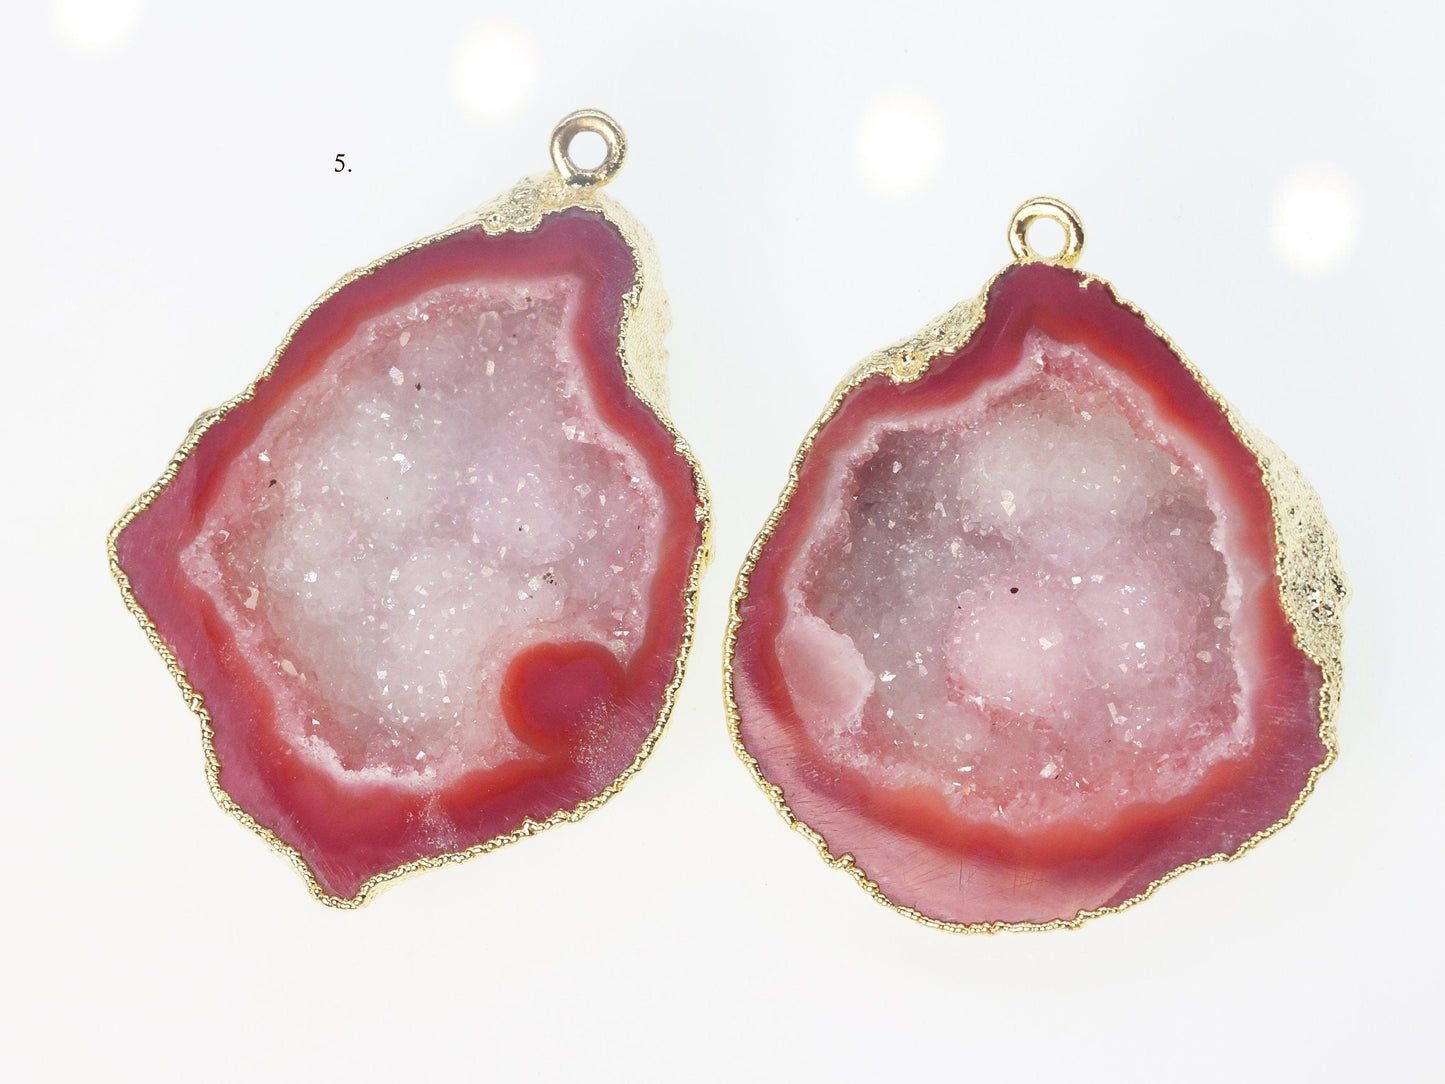 Gold Edged orange cave druzy or tobasco druzy geode Pairs For Earrings * Order Exact Pairs as in Photos* - Meena Design